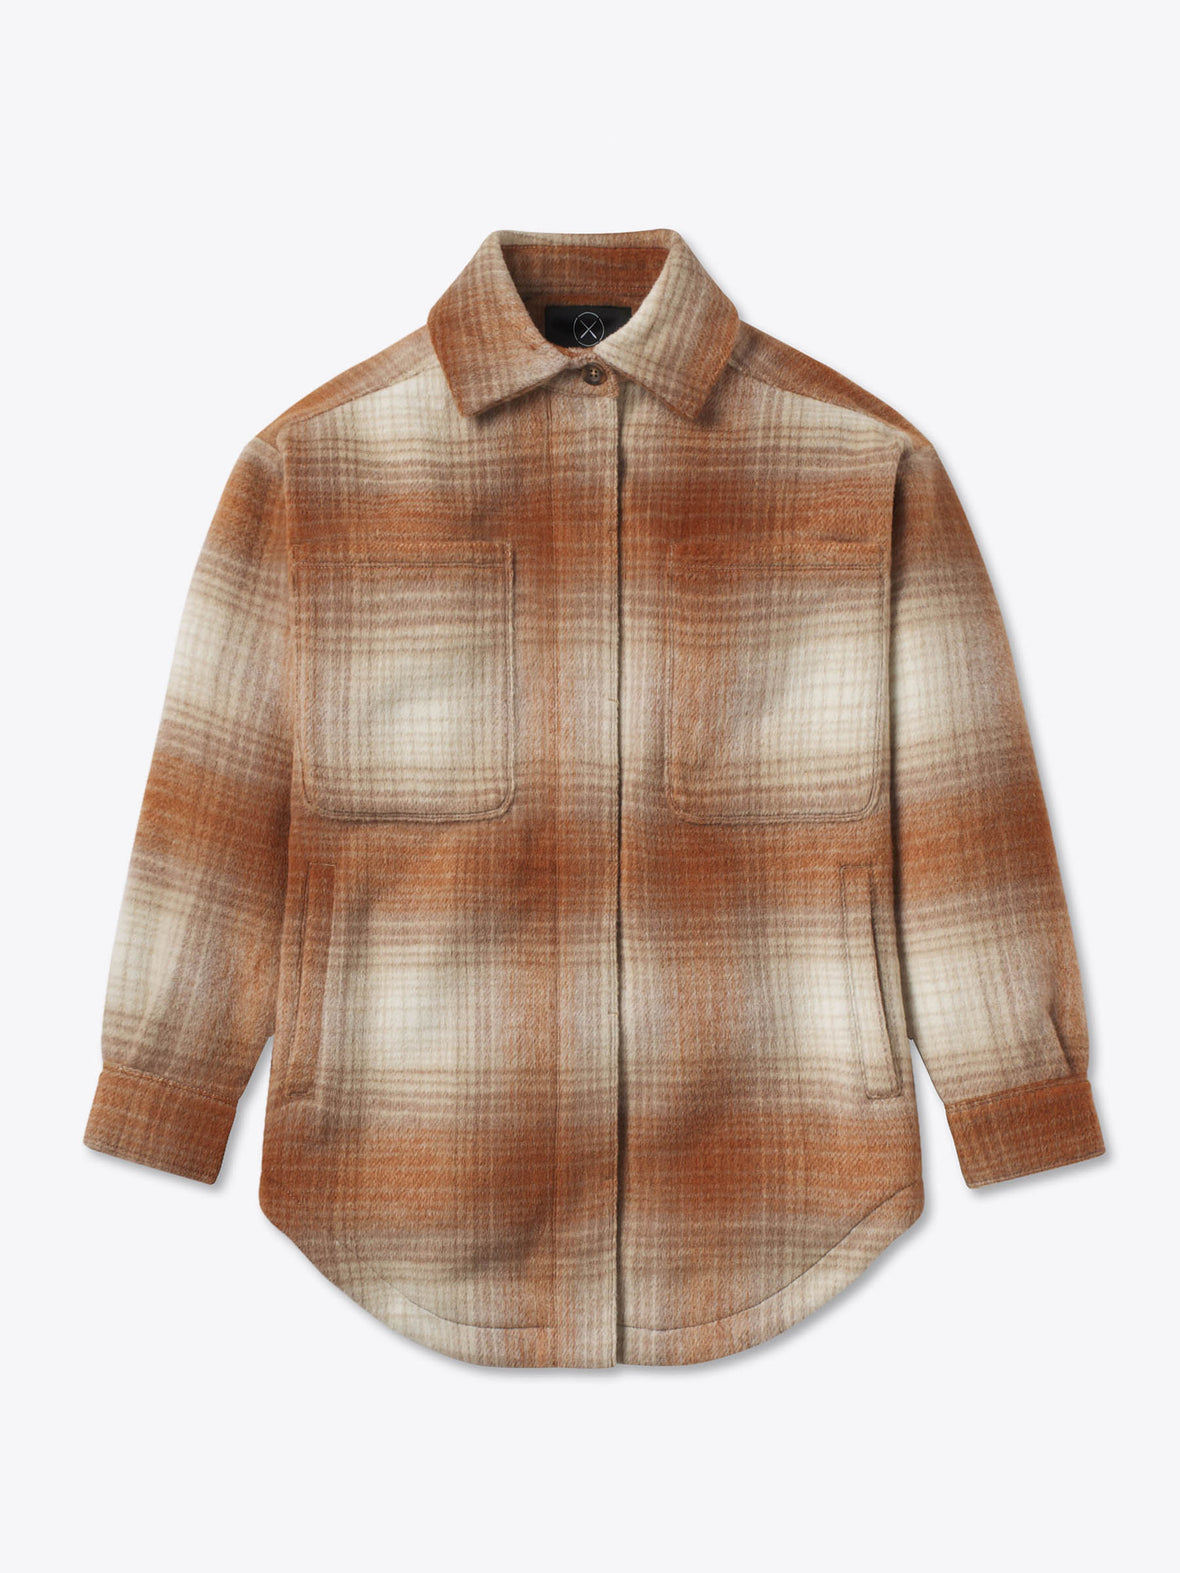 Columbia Shirt Jacket | Orchard Plaid Relaxed-Fit